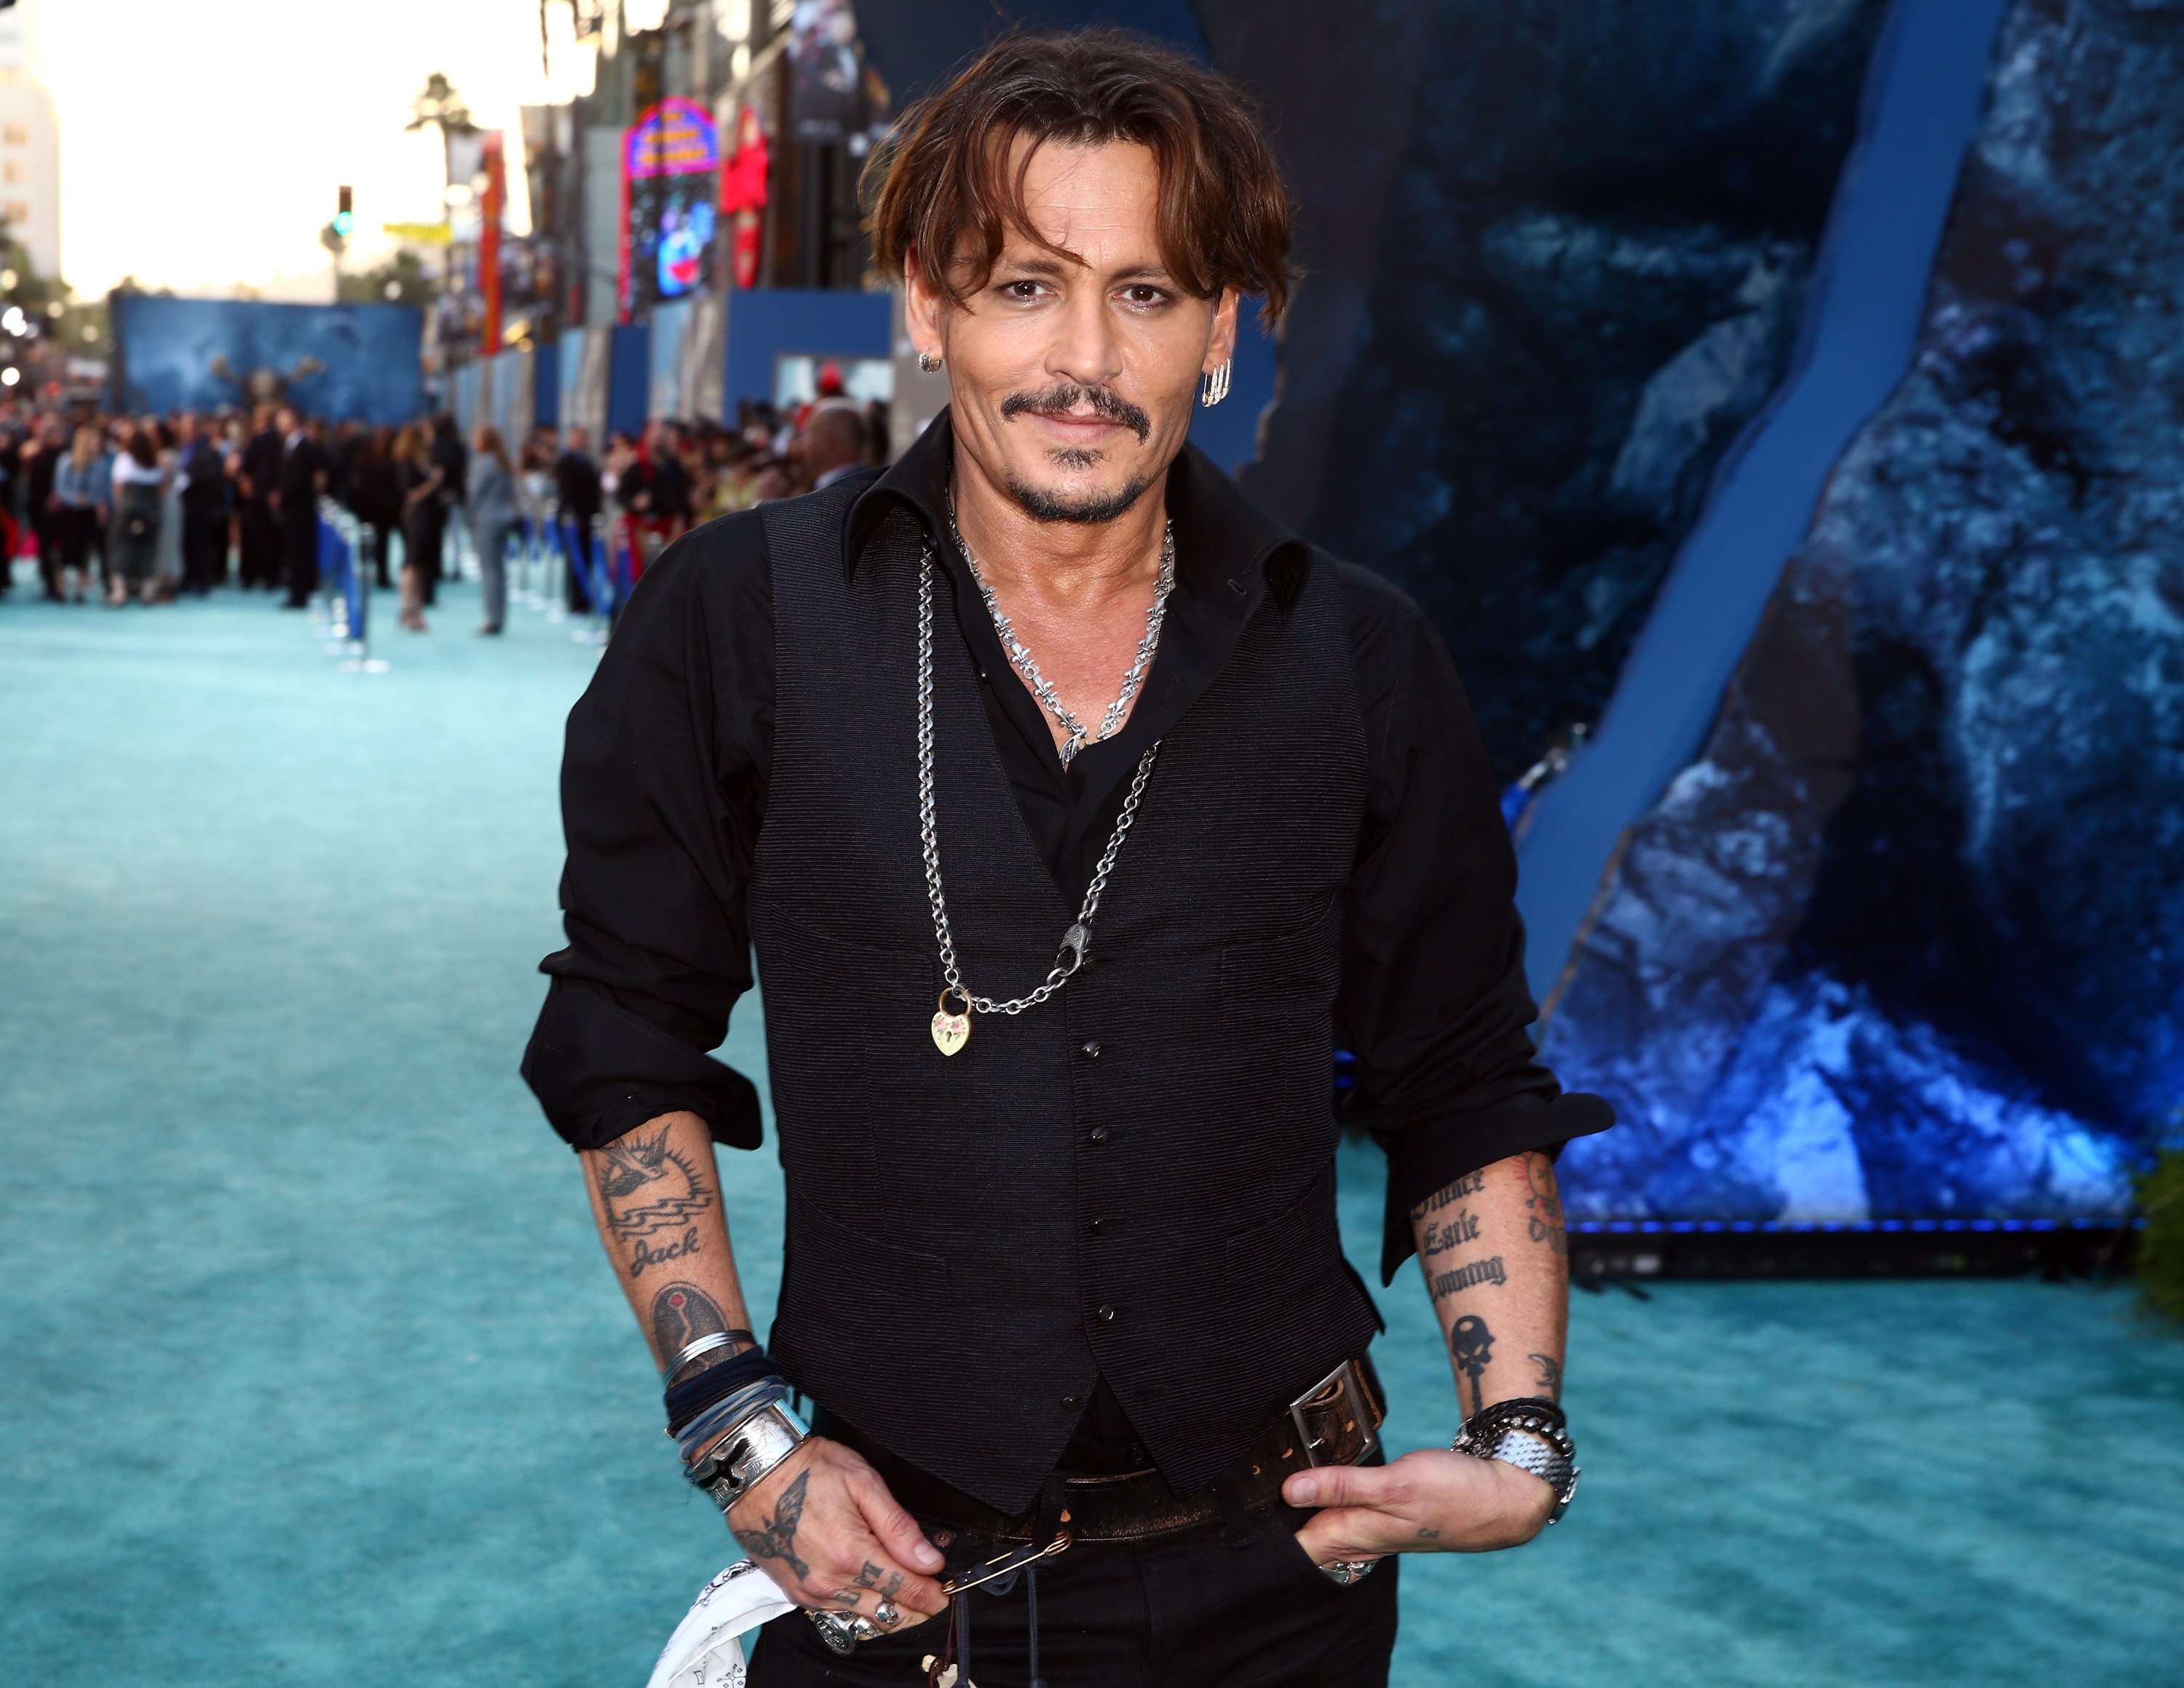 Johnny Depp wearing a necklace